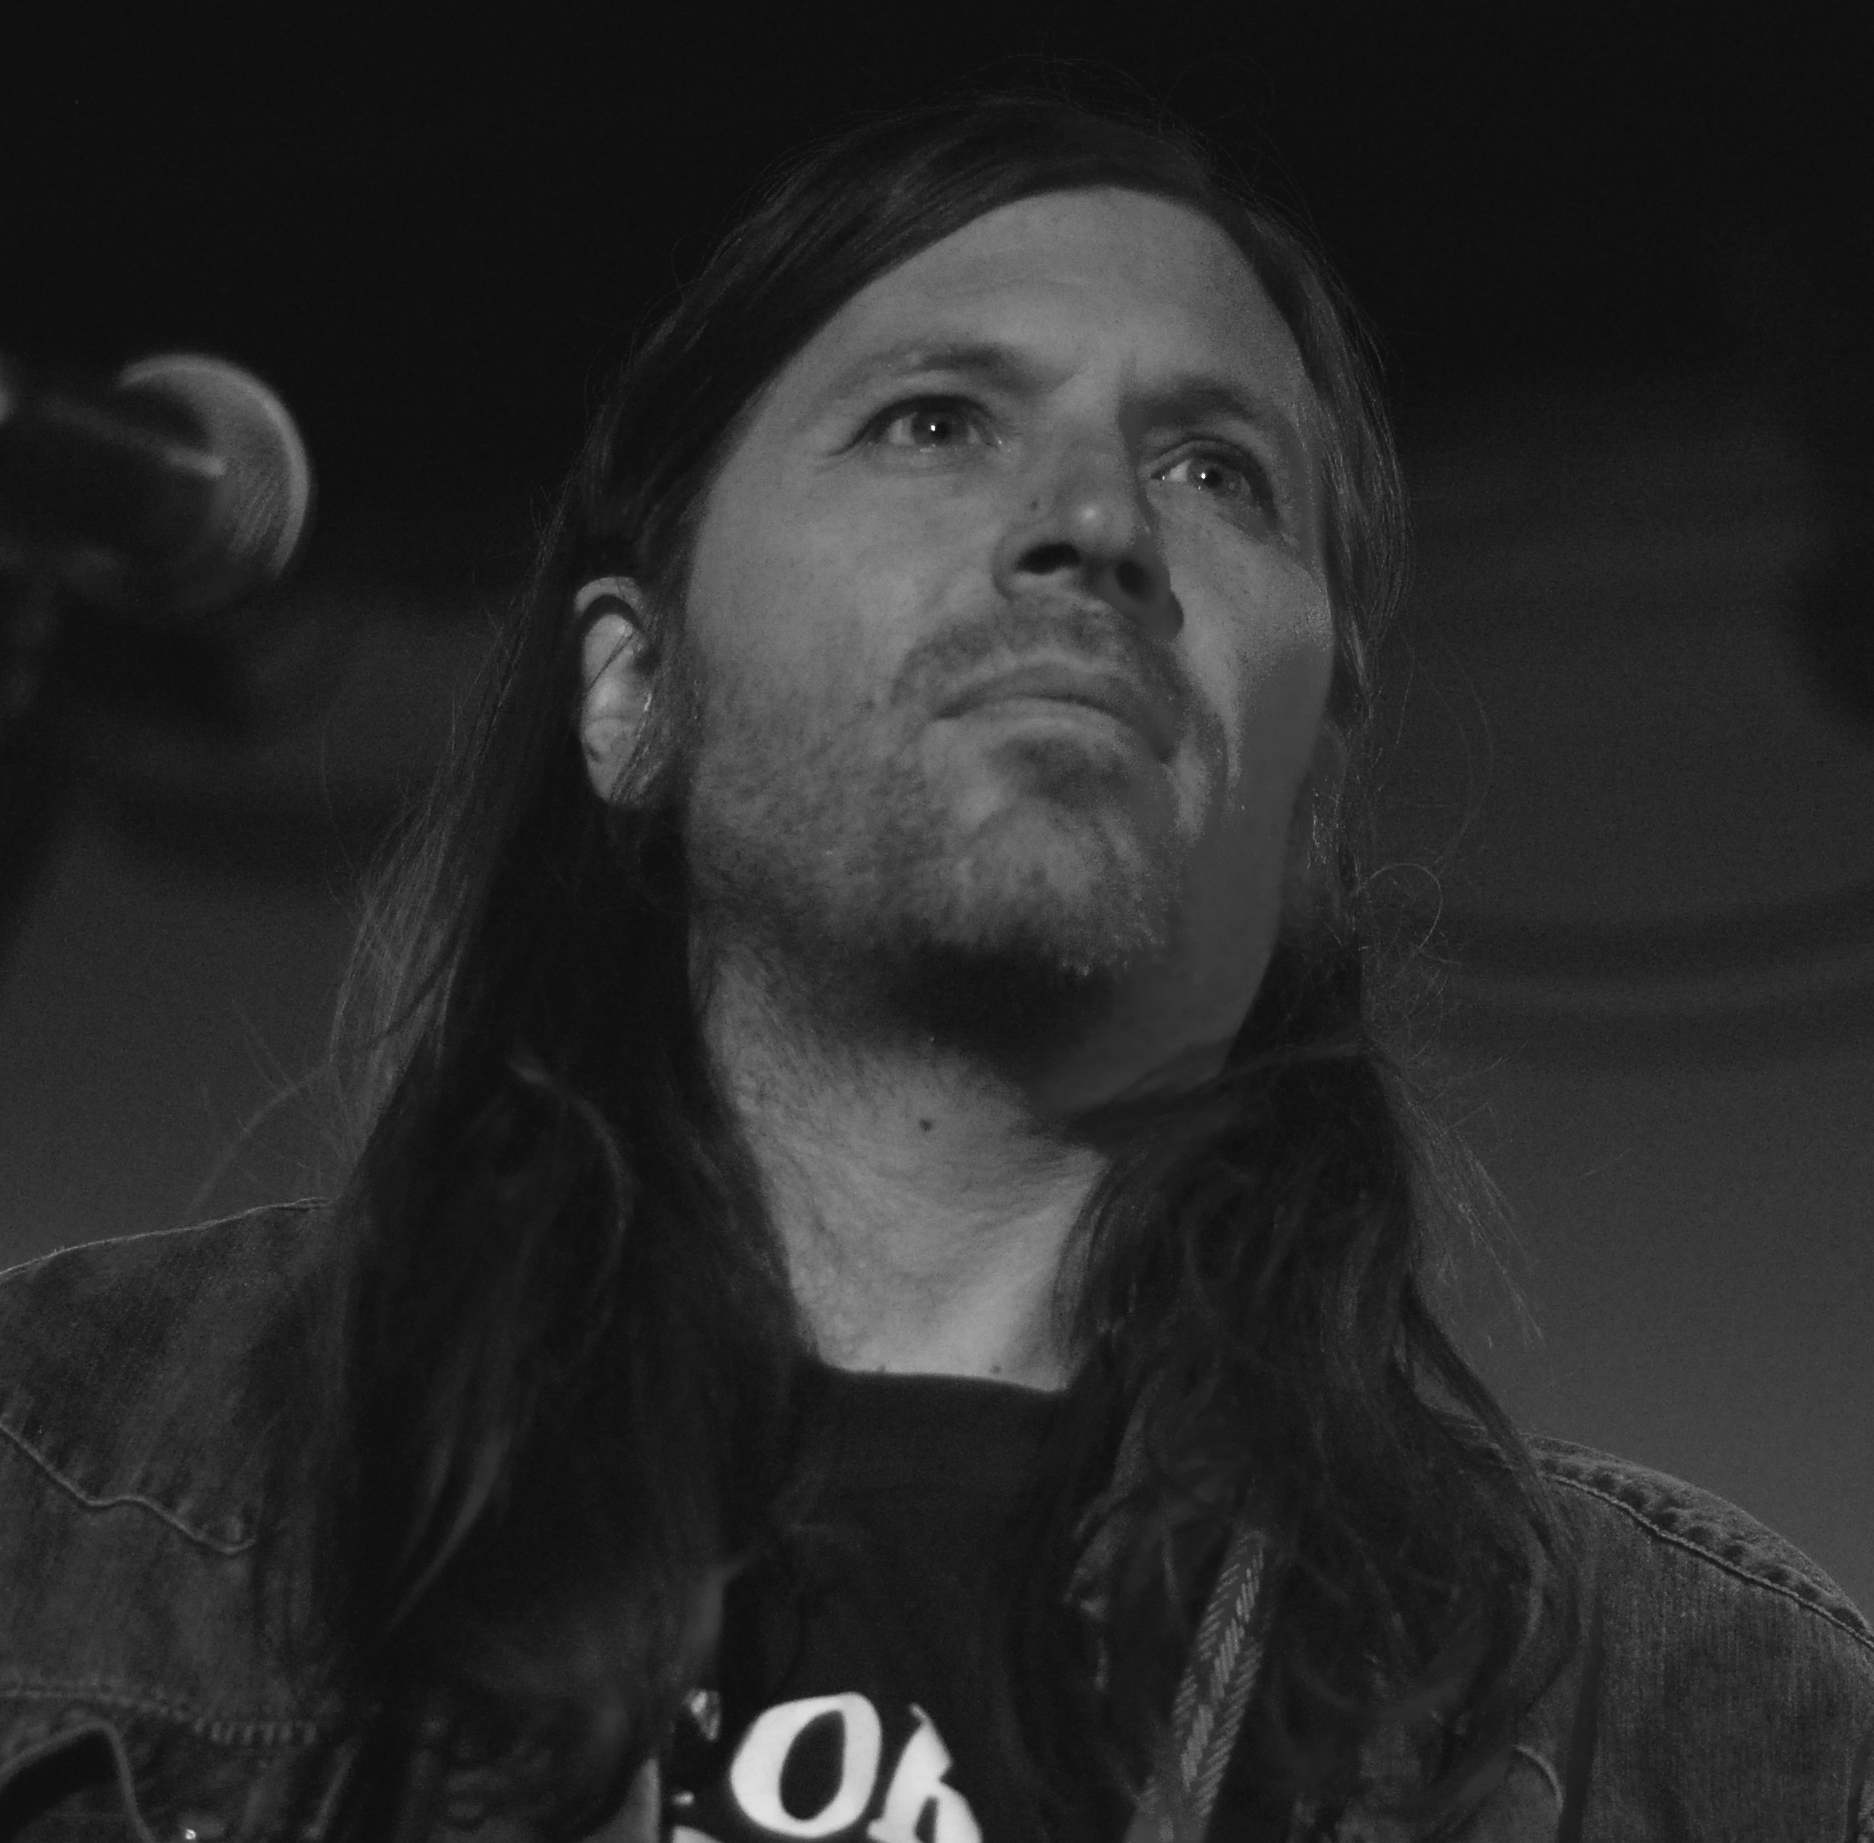  Evan Dando live at The Globe, Cardiff - 7th July 2011  Photo by Francis Brown 